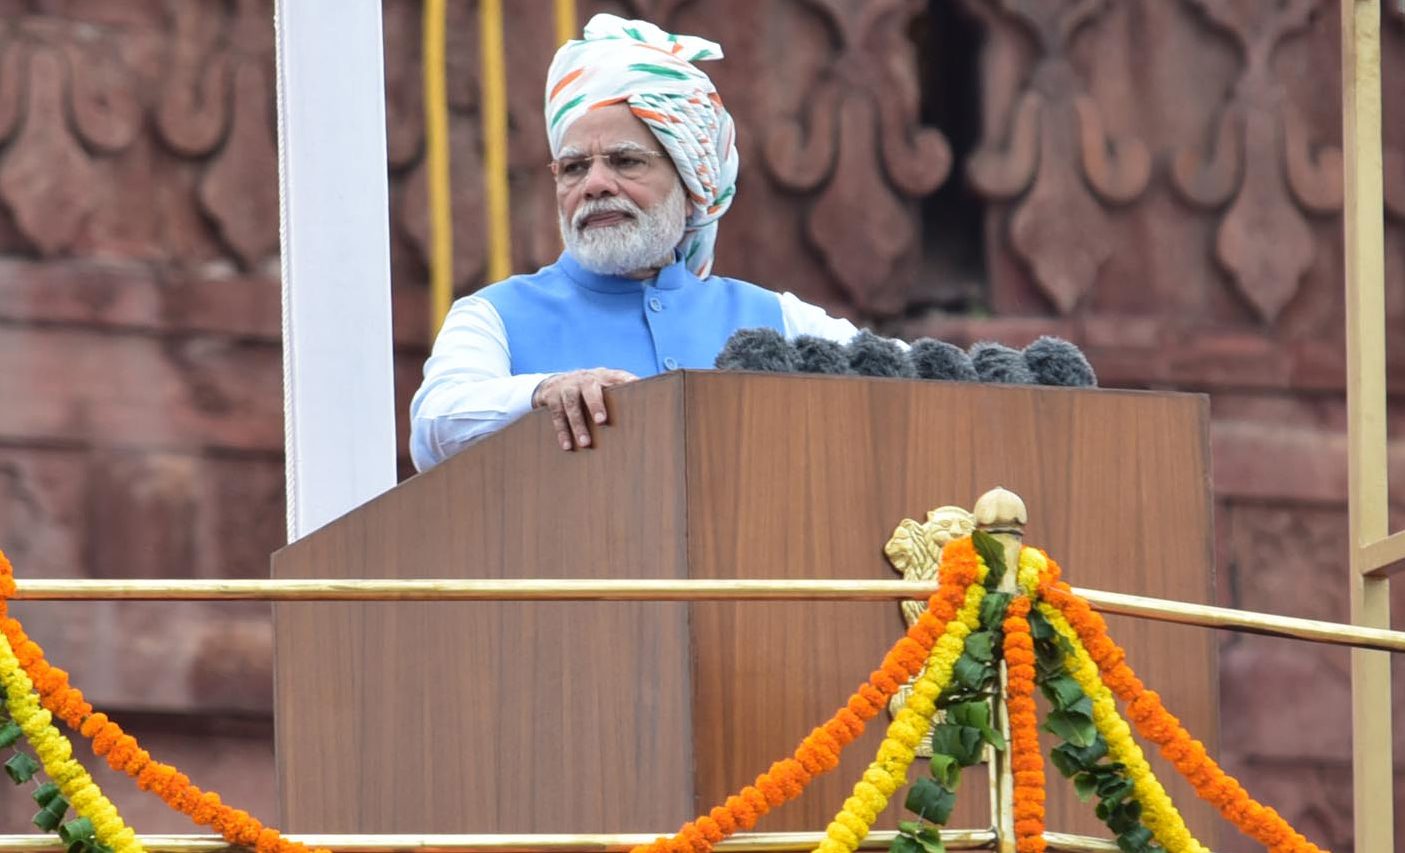 PM Modi will participate in the Valor Day celebrations at the Red Fort today, the PMO informed in a statement